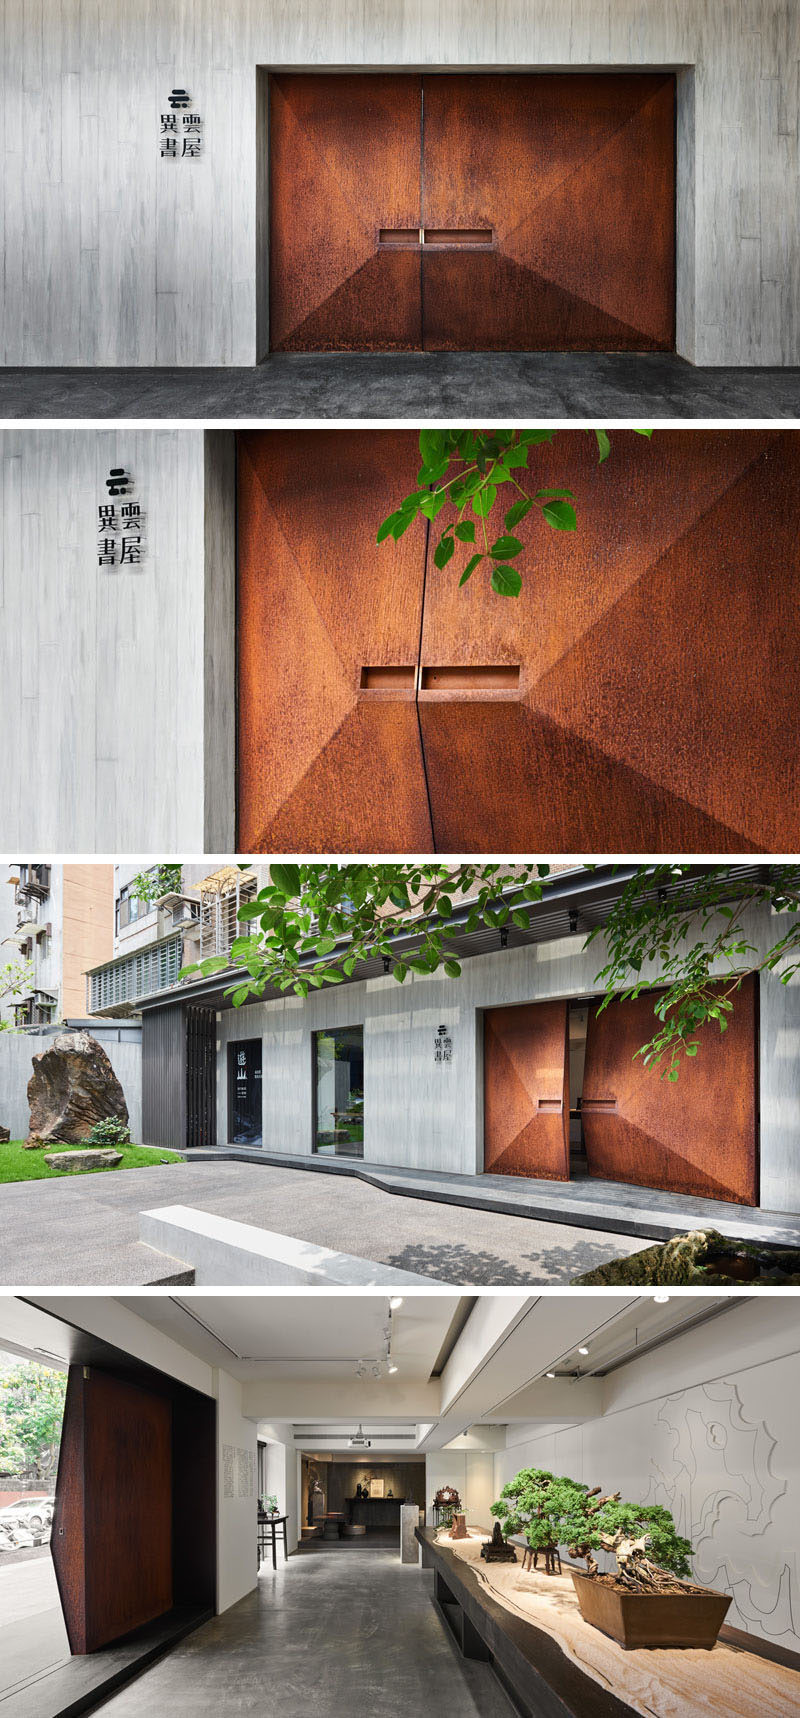 BASS Design have created the Yiyun Art Gallery, and as part of the design they installed geometrically shaped doors made from weathered steel. #WeatheredSteel #ModernDoor #SteelDoor